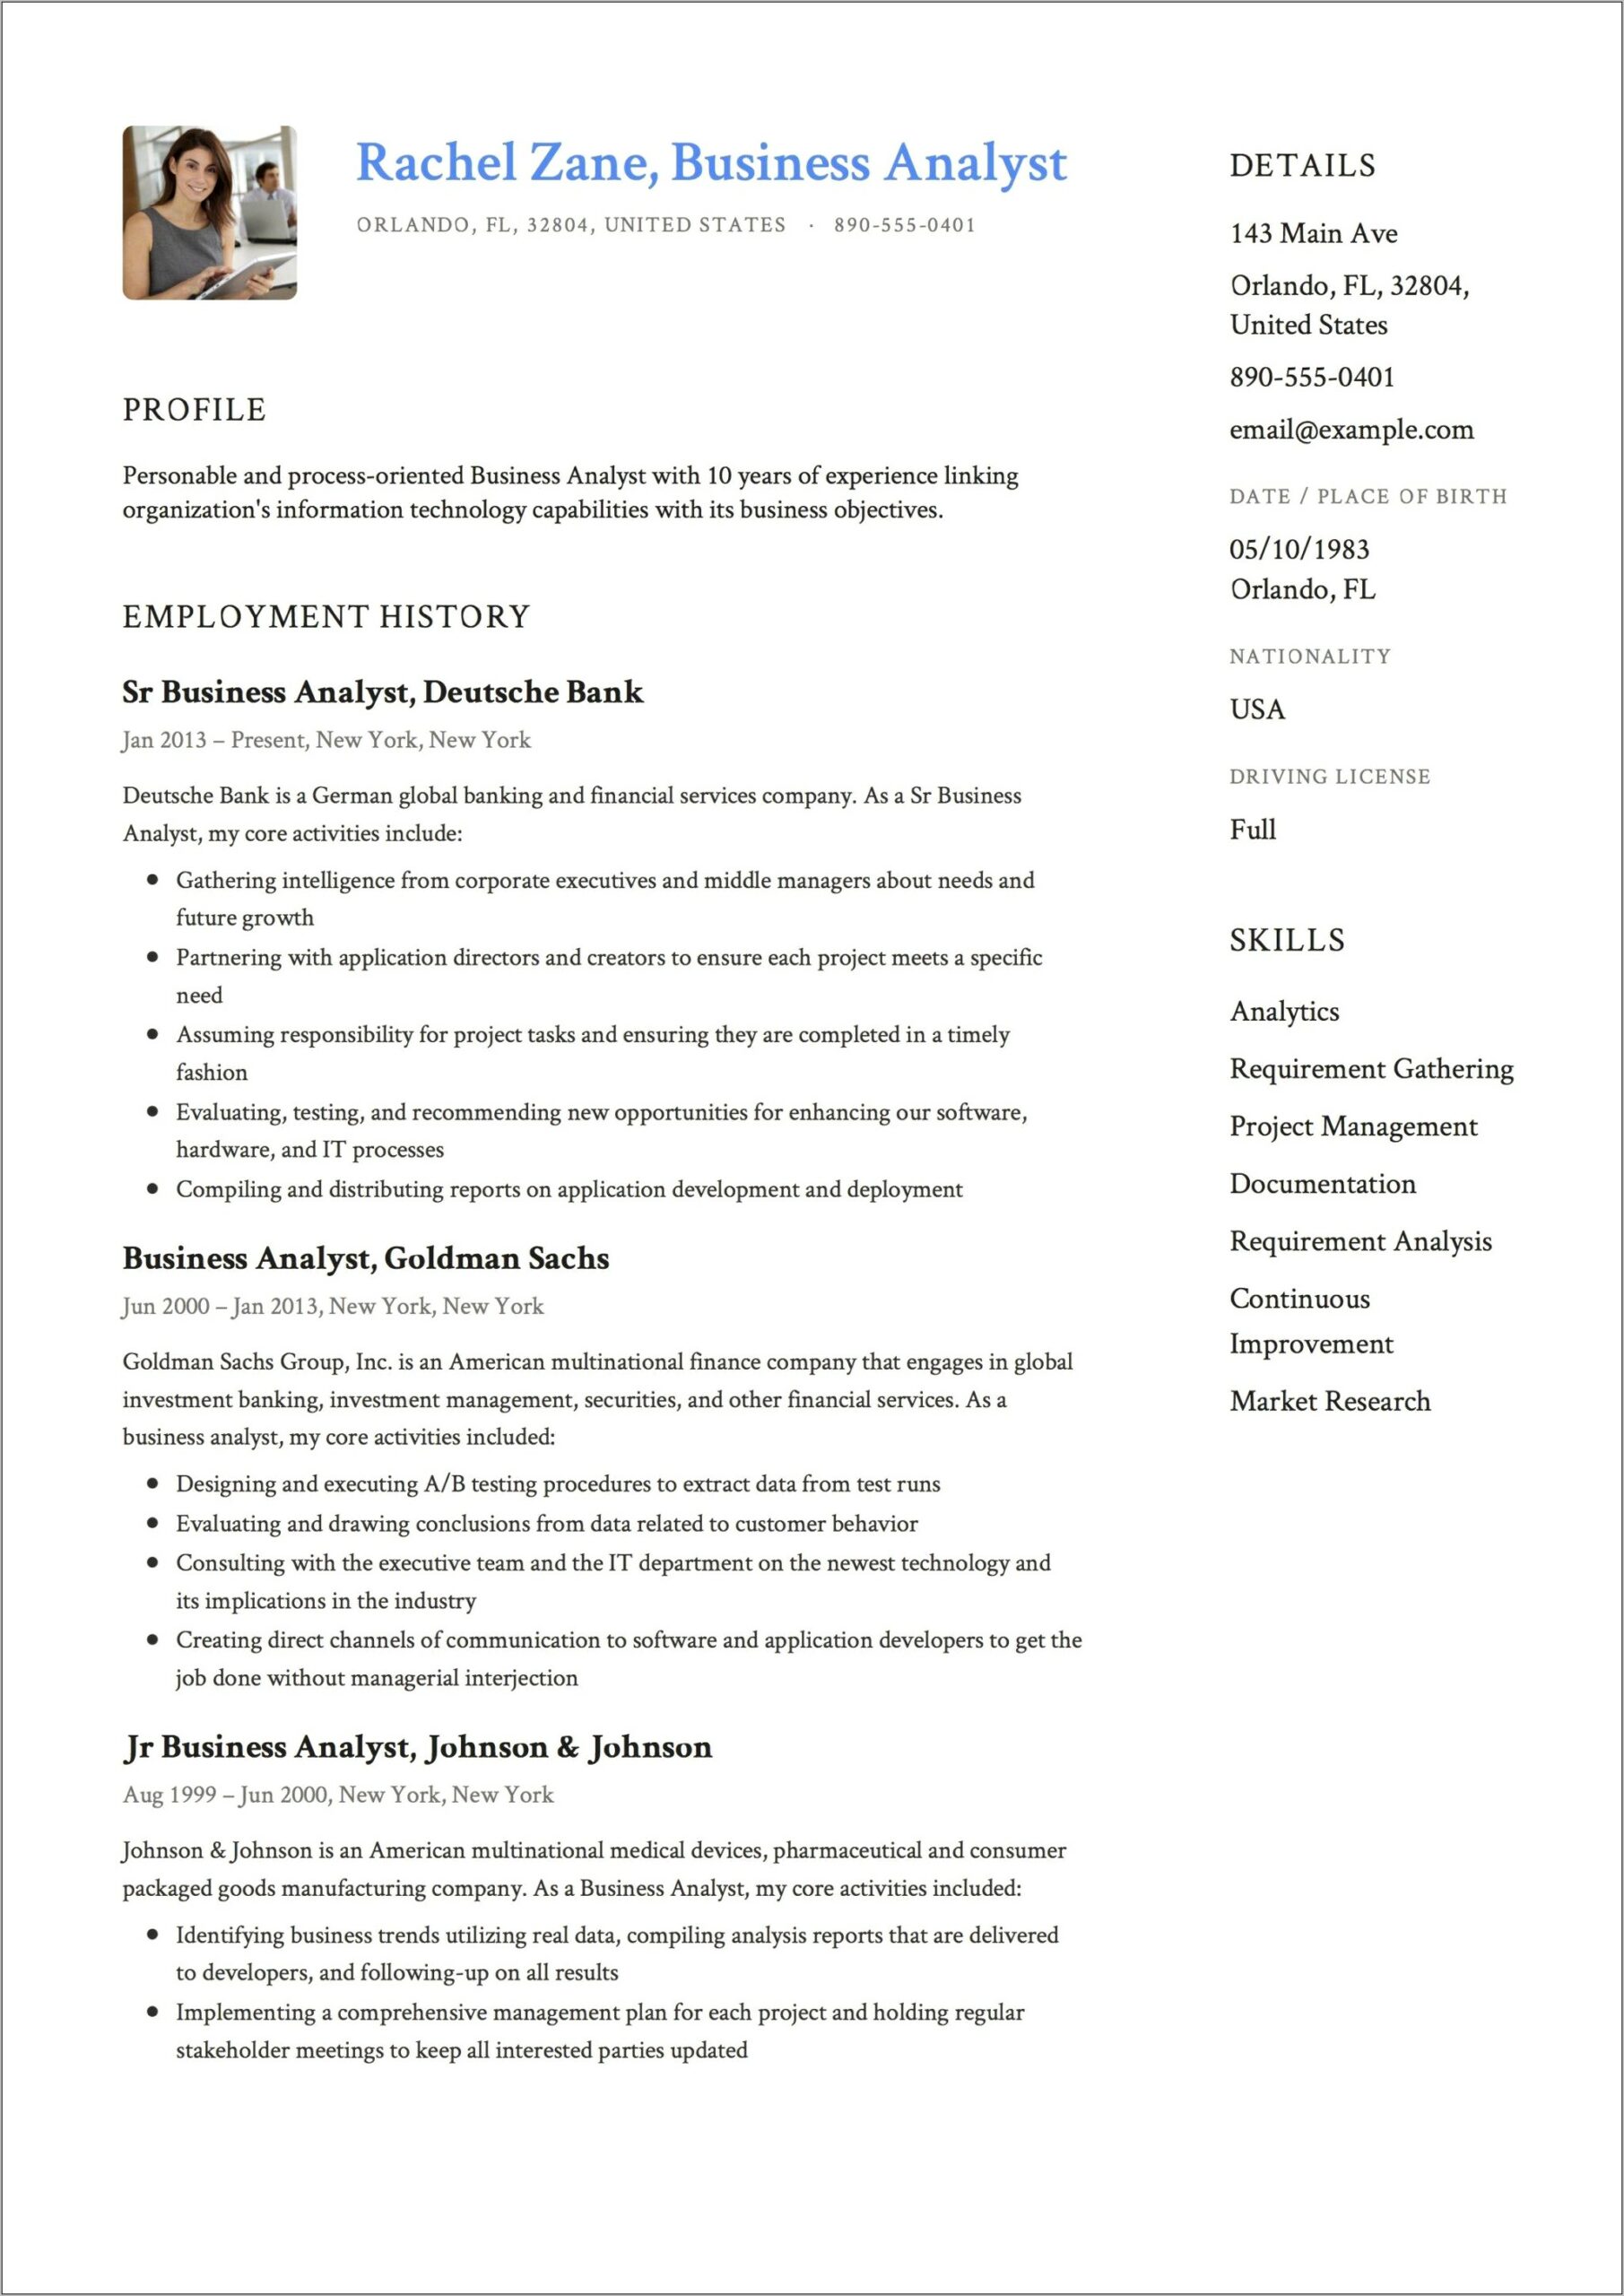 Example Of Cannabis Industry Resume